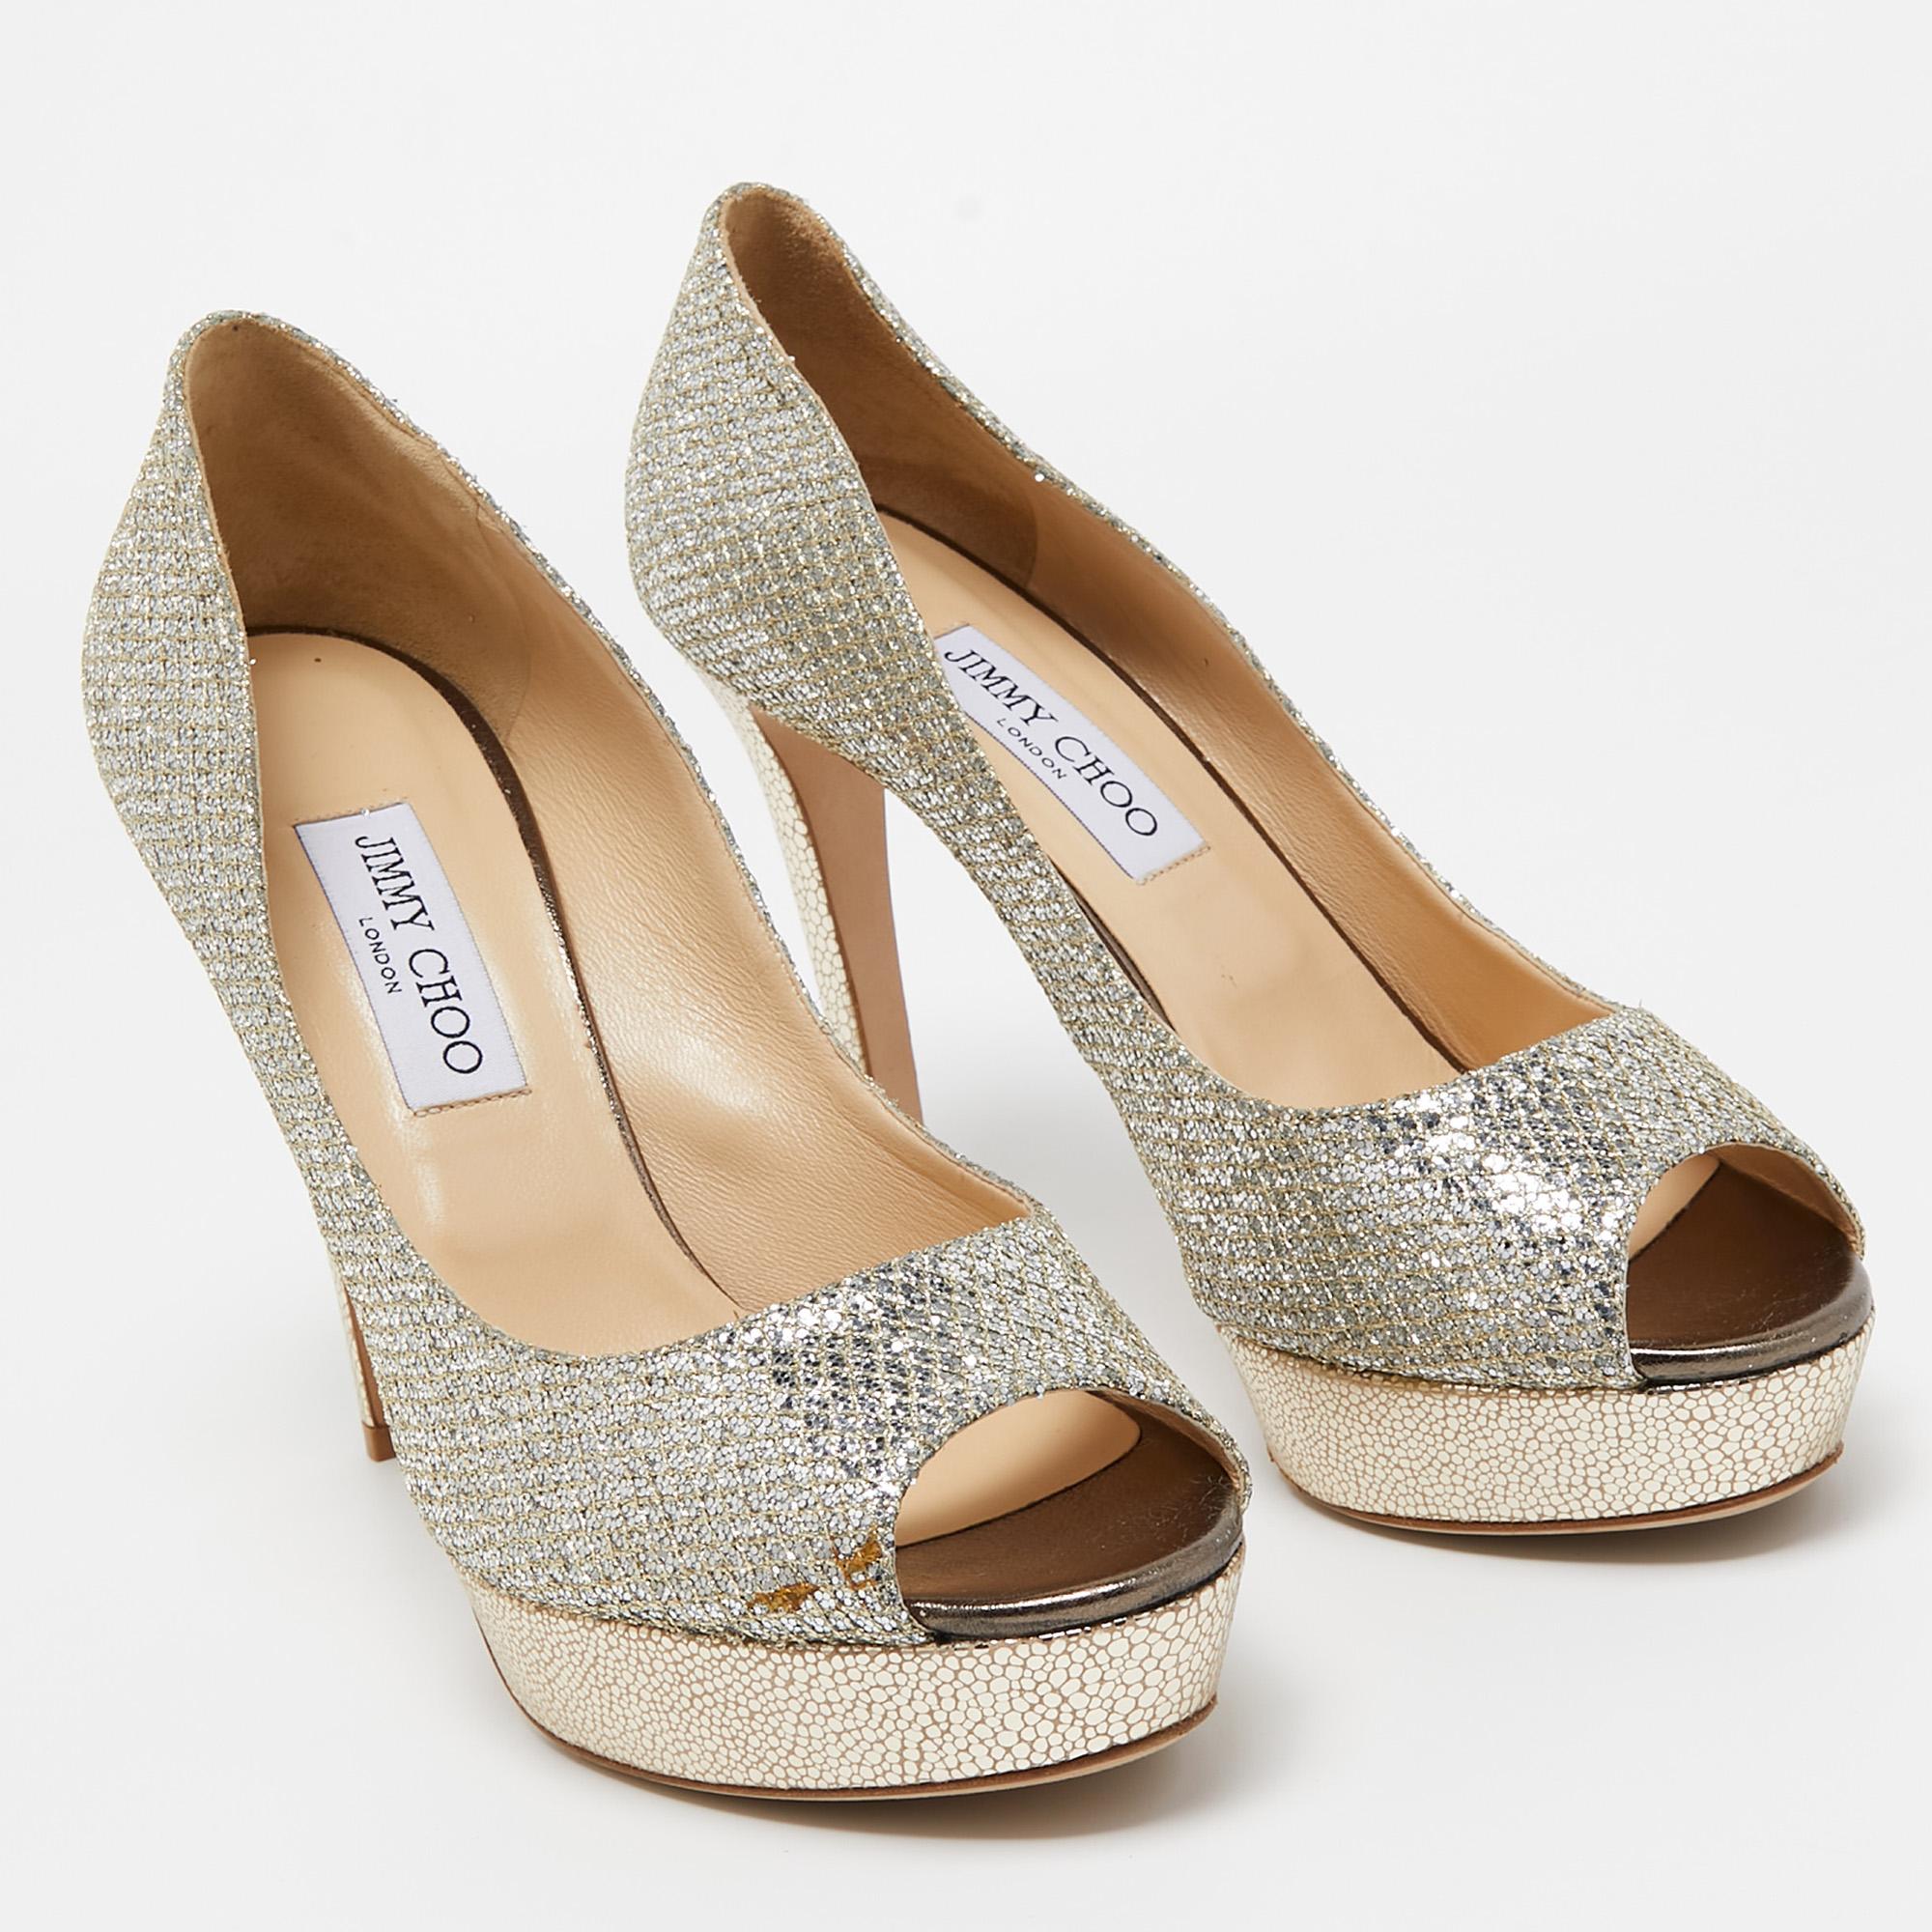 Women's Jimmy Choo Gold/Silver Glitter and Leather Dahlia Peep Toe Pumps Size 41.5